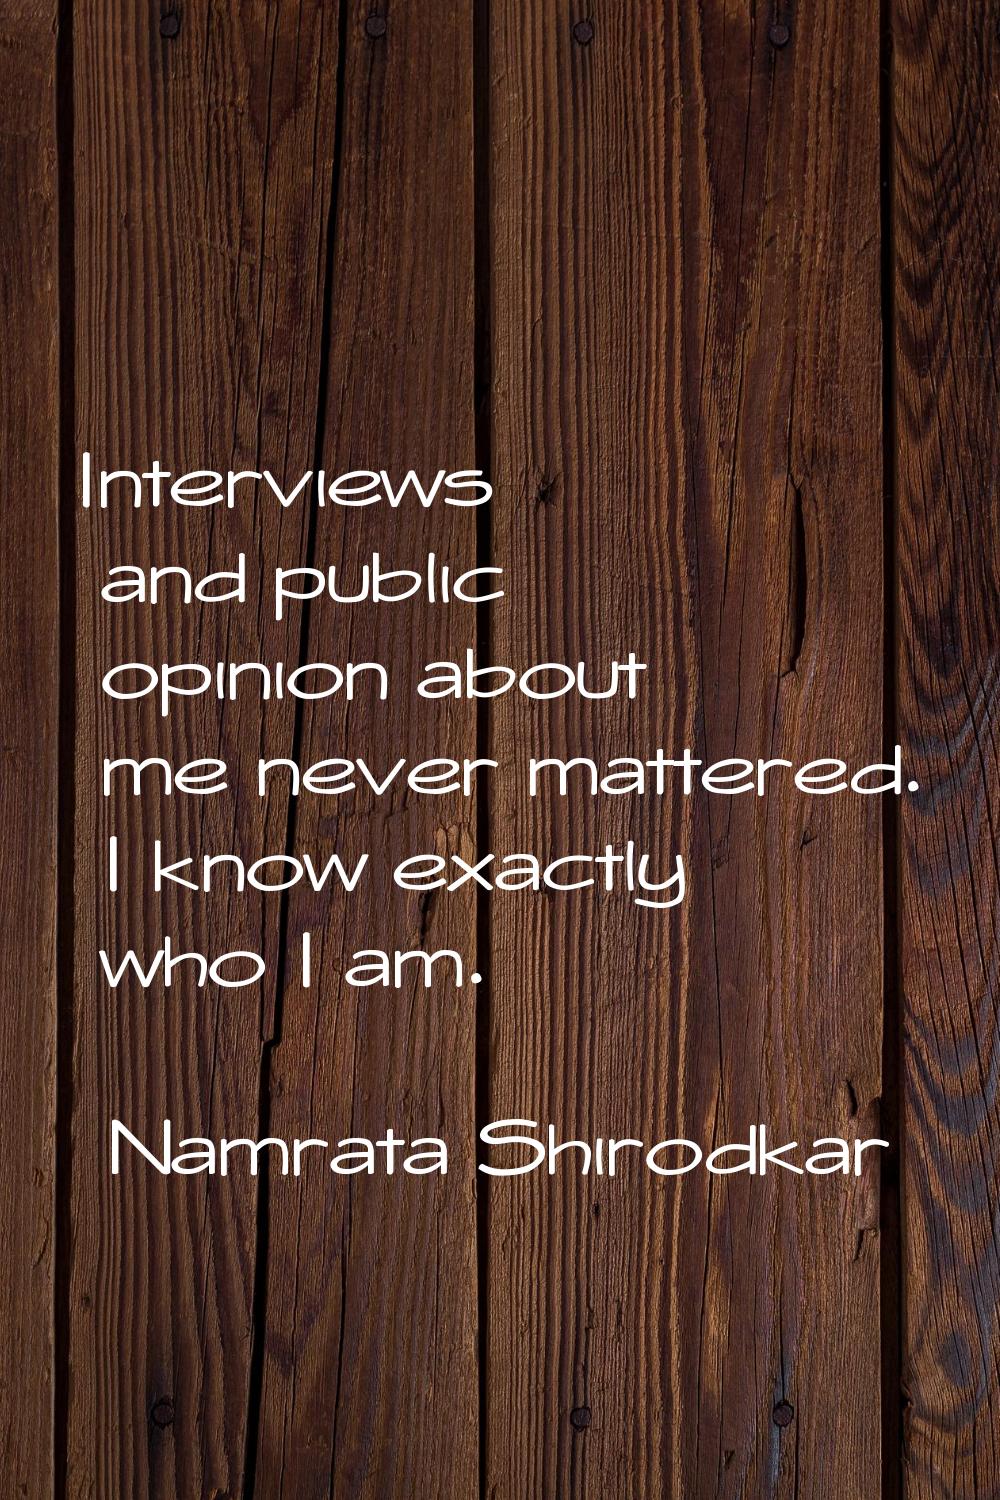 Interviews and public opinion about me never mattered. I know exactly who I am.